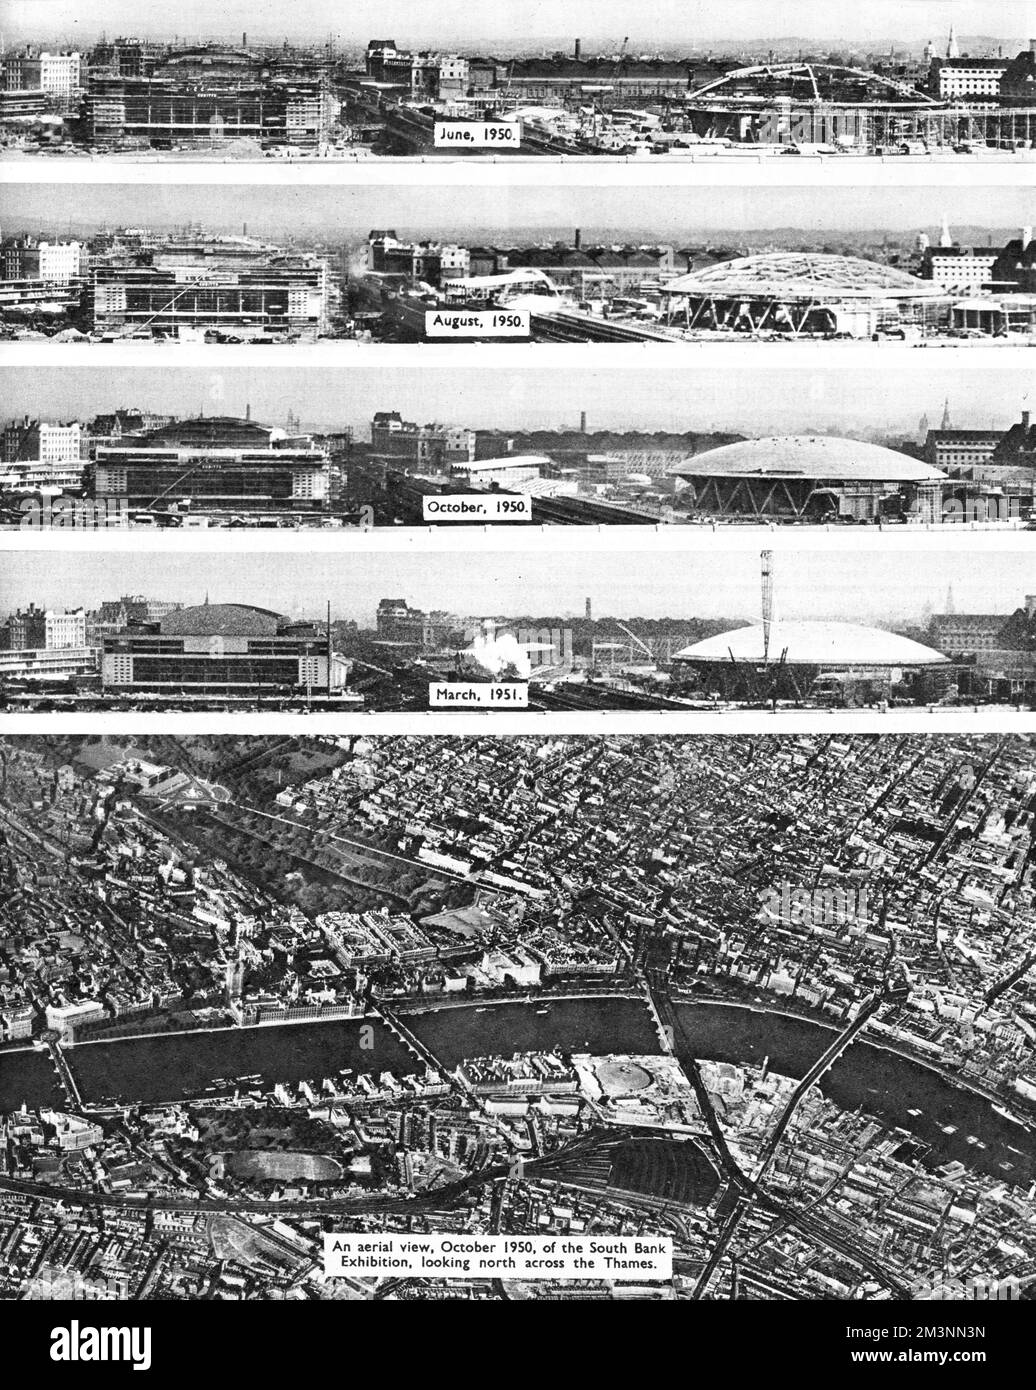 Four views of the Festival of Britain construction, dating from June 1950 to March 1951, with an aerial view below, showing London's South Bank in October 1950, looking north across the River Thames.       Date: 1950-1951 Stock Photo